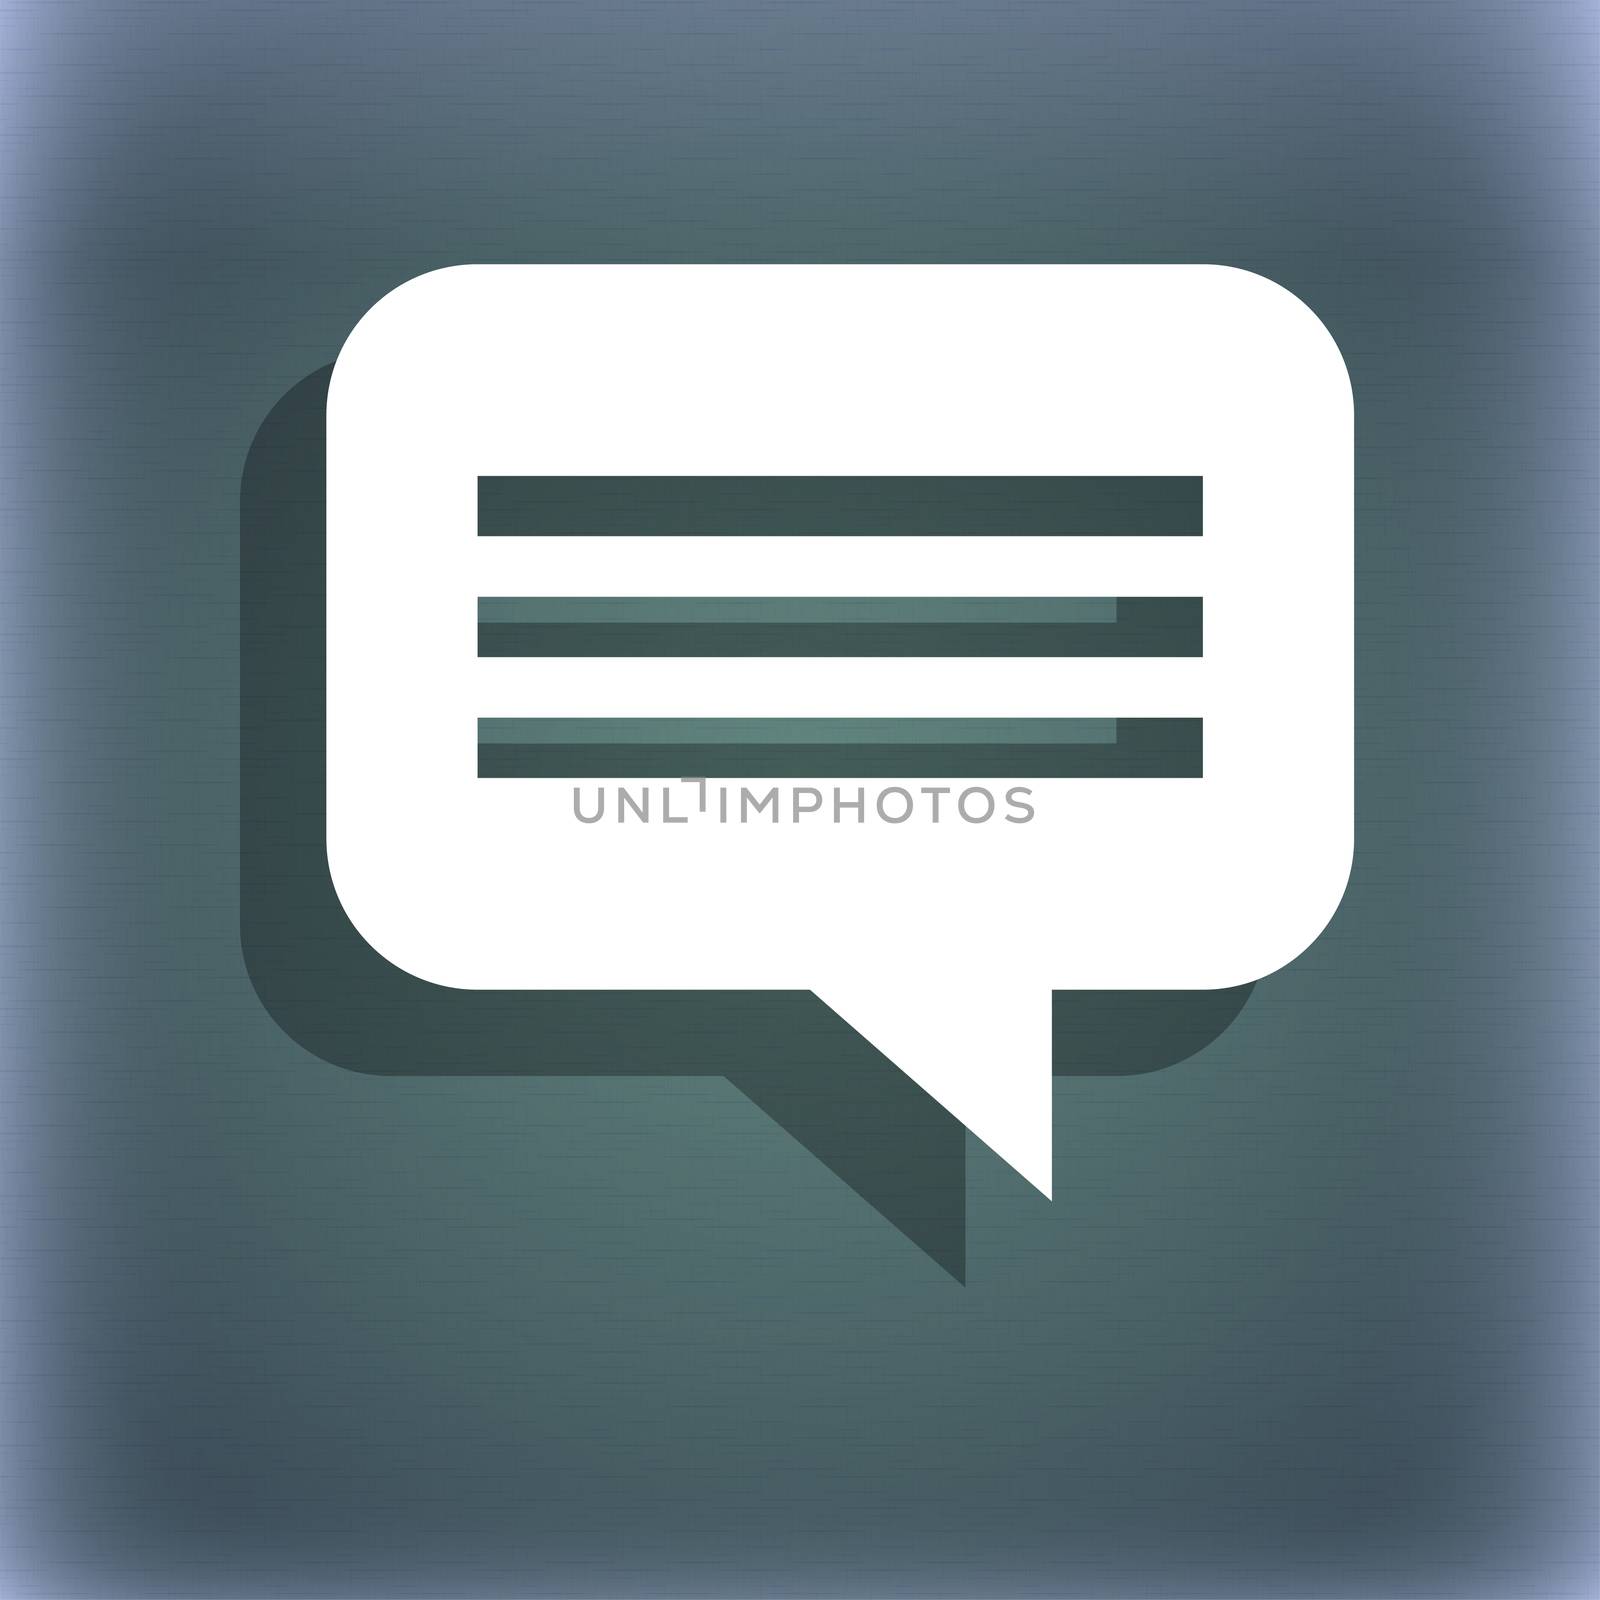 speech bubble, Chat think icon symbol on the blue-green abstract background with shadow and space for your text. illustration